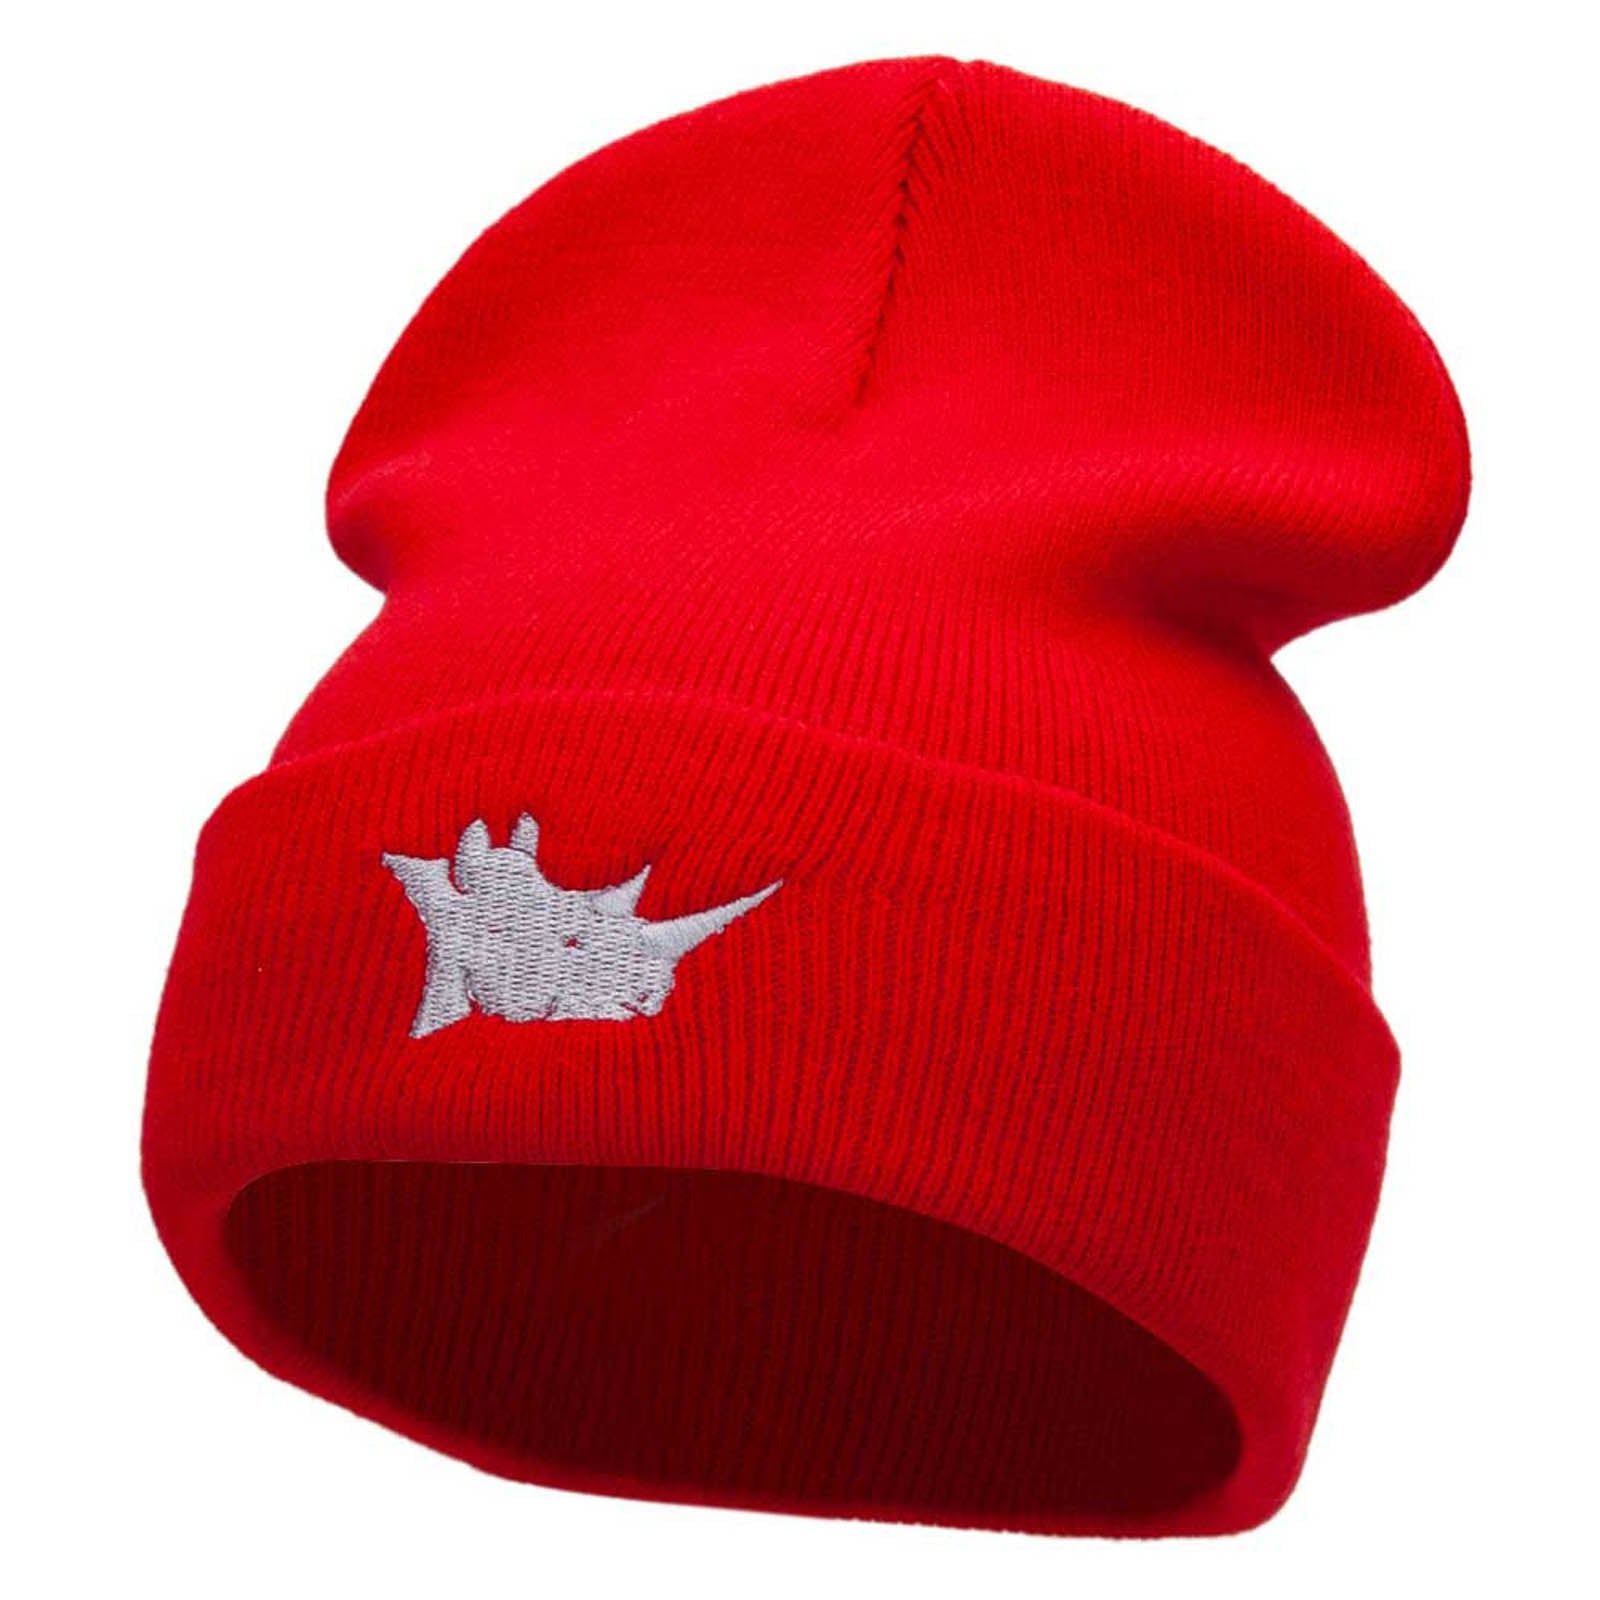 Rhino Head Embroidered 12 Inch Long Knitted Beanie - Red OSFM